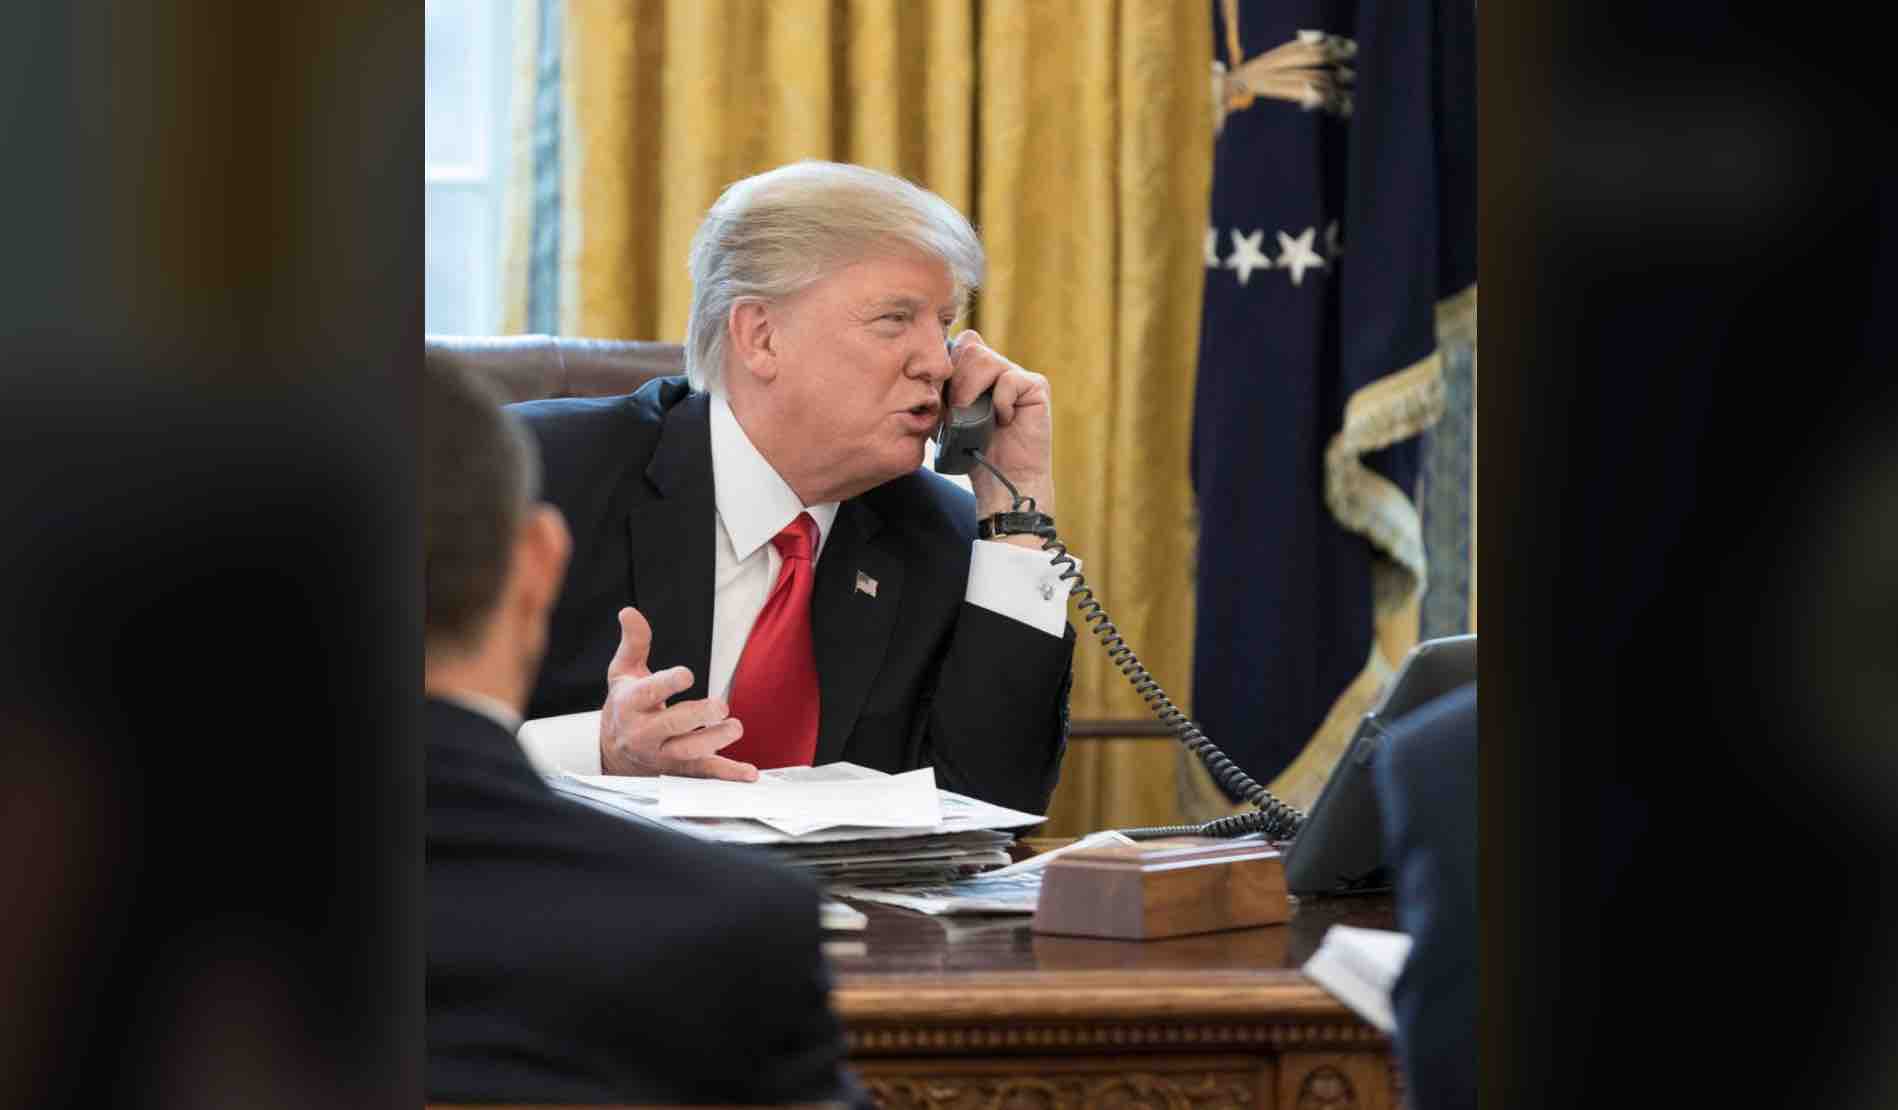 Donald Trump praised the governors on conference call